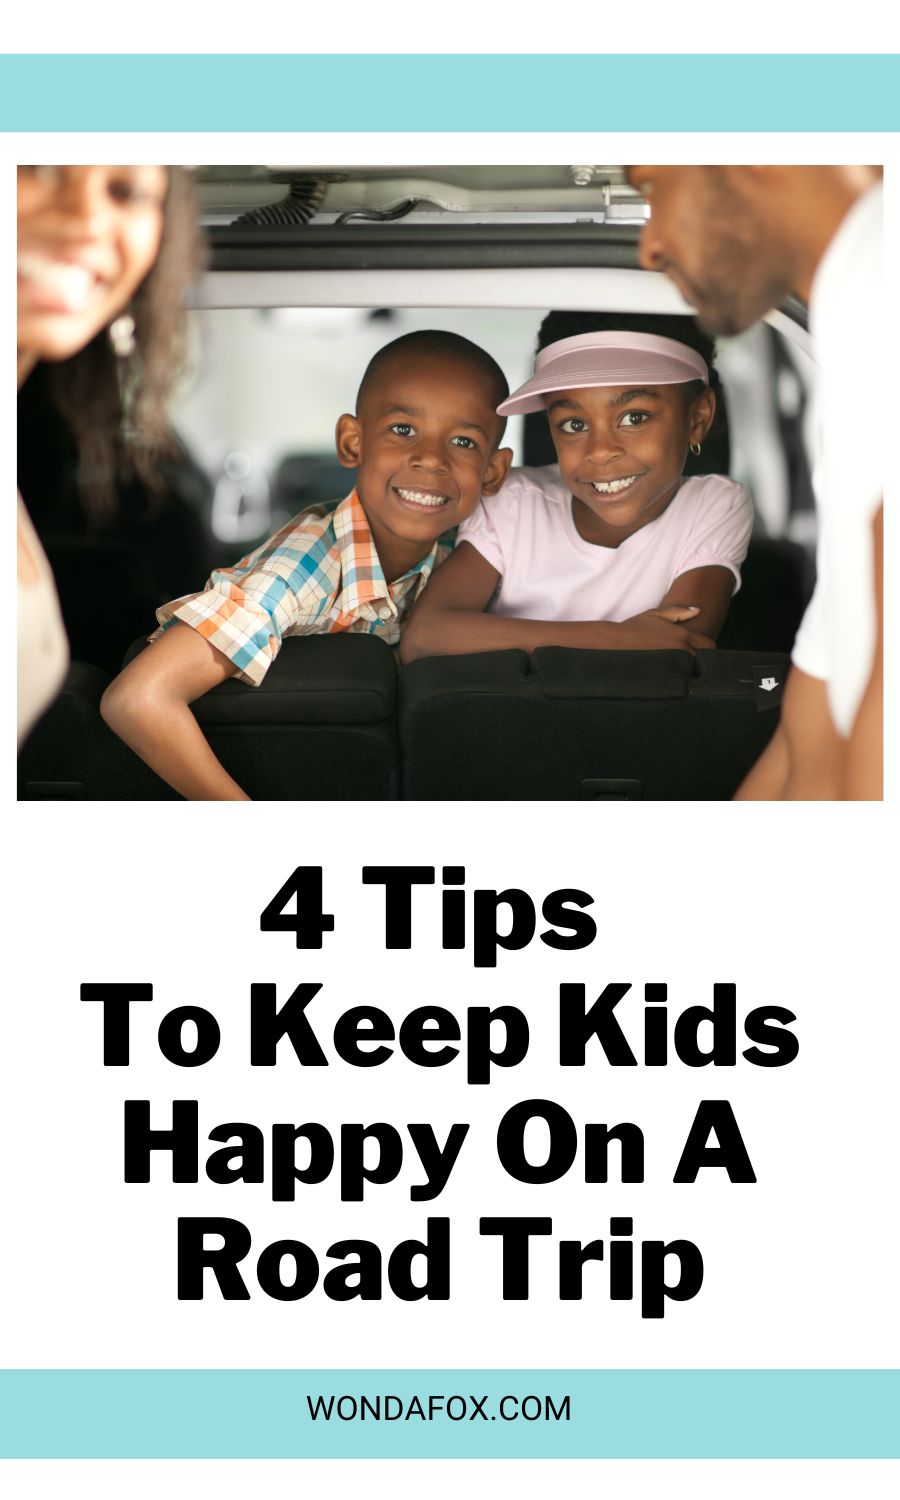 4 tips to keep kids happy on a road trip